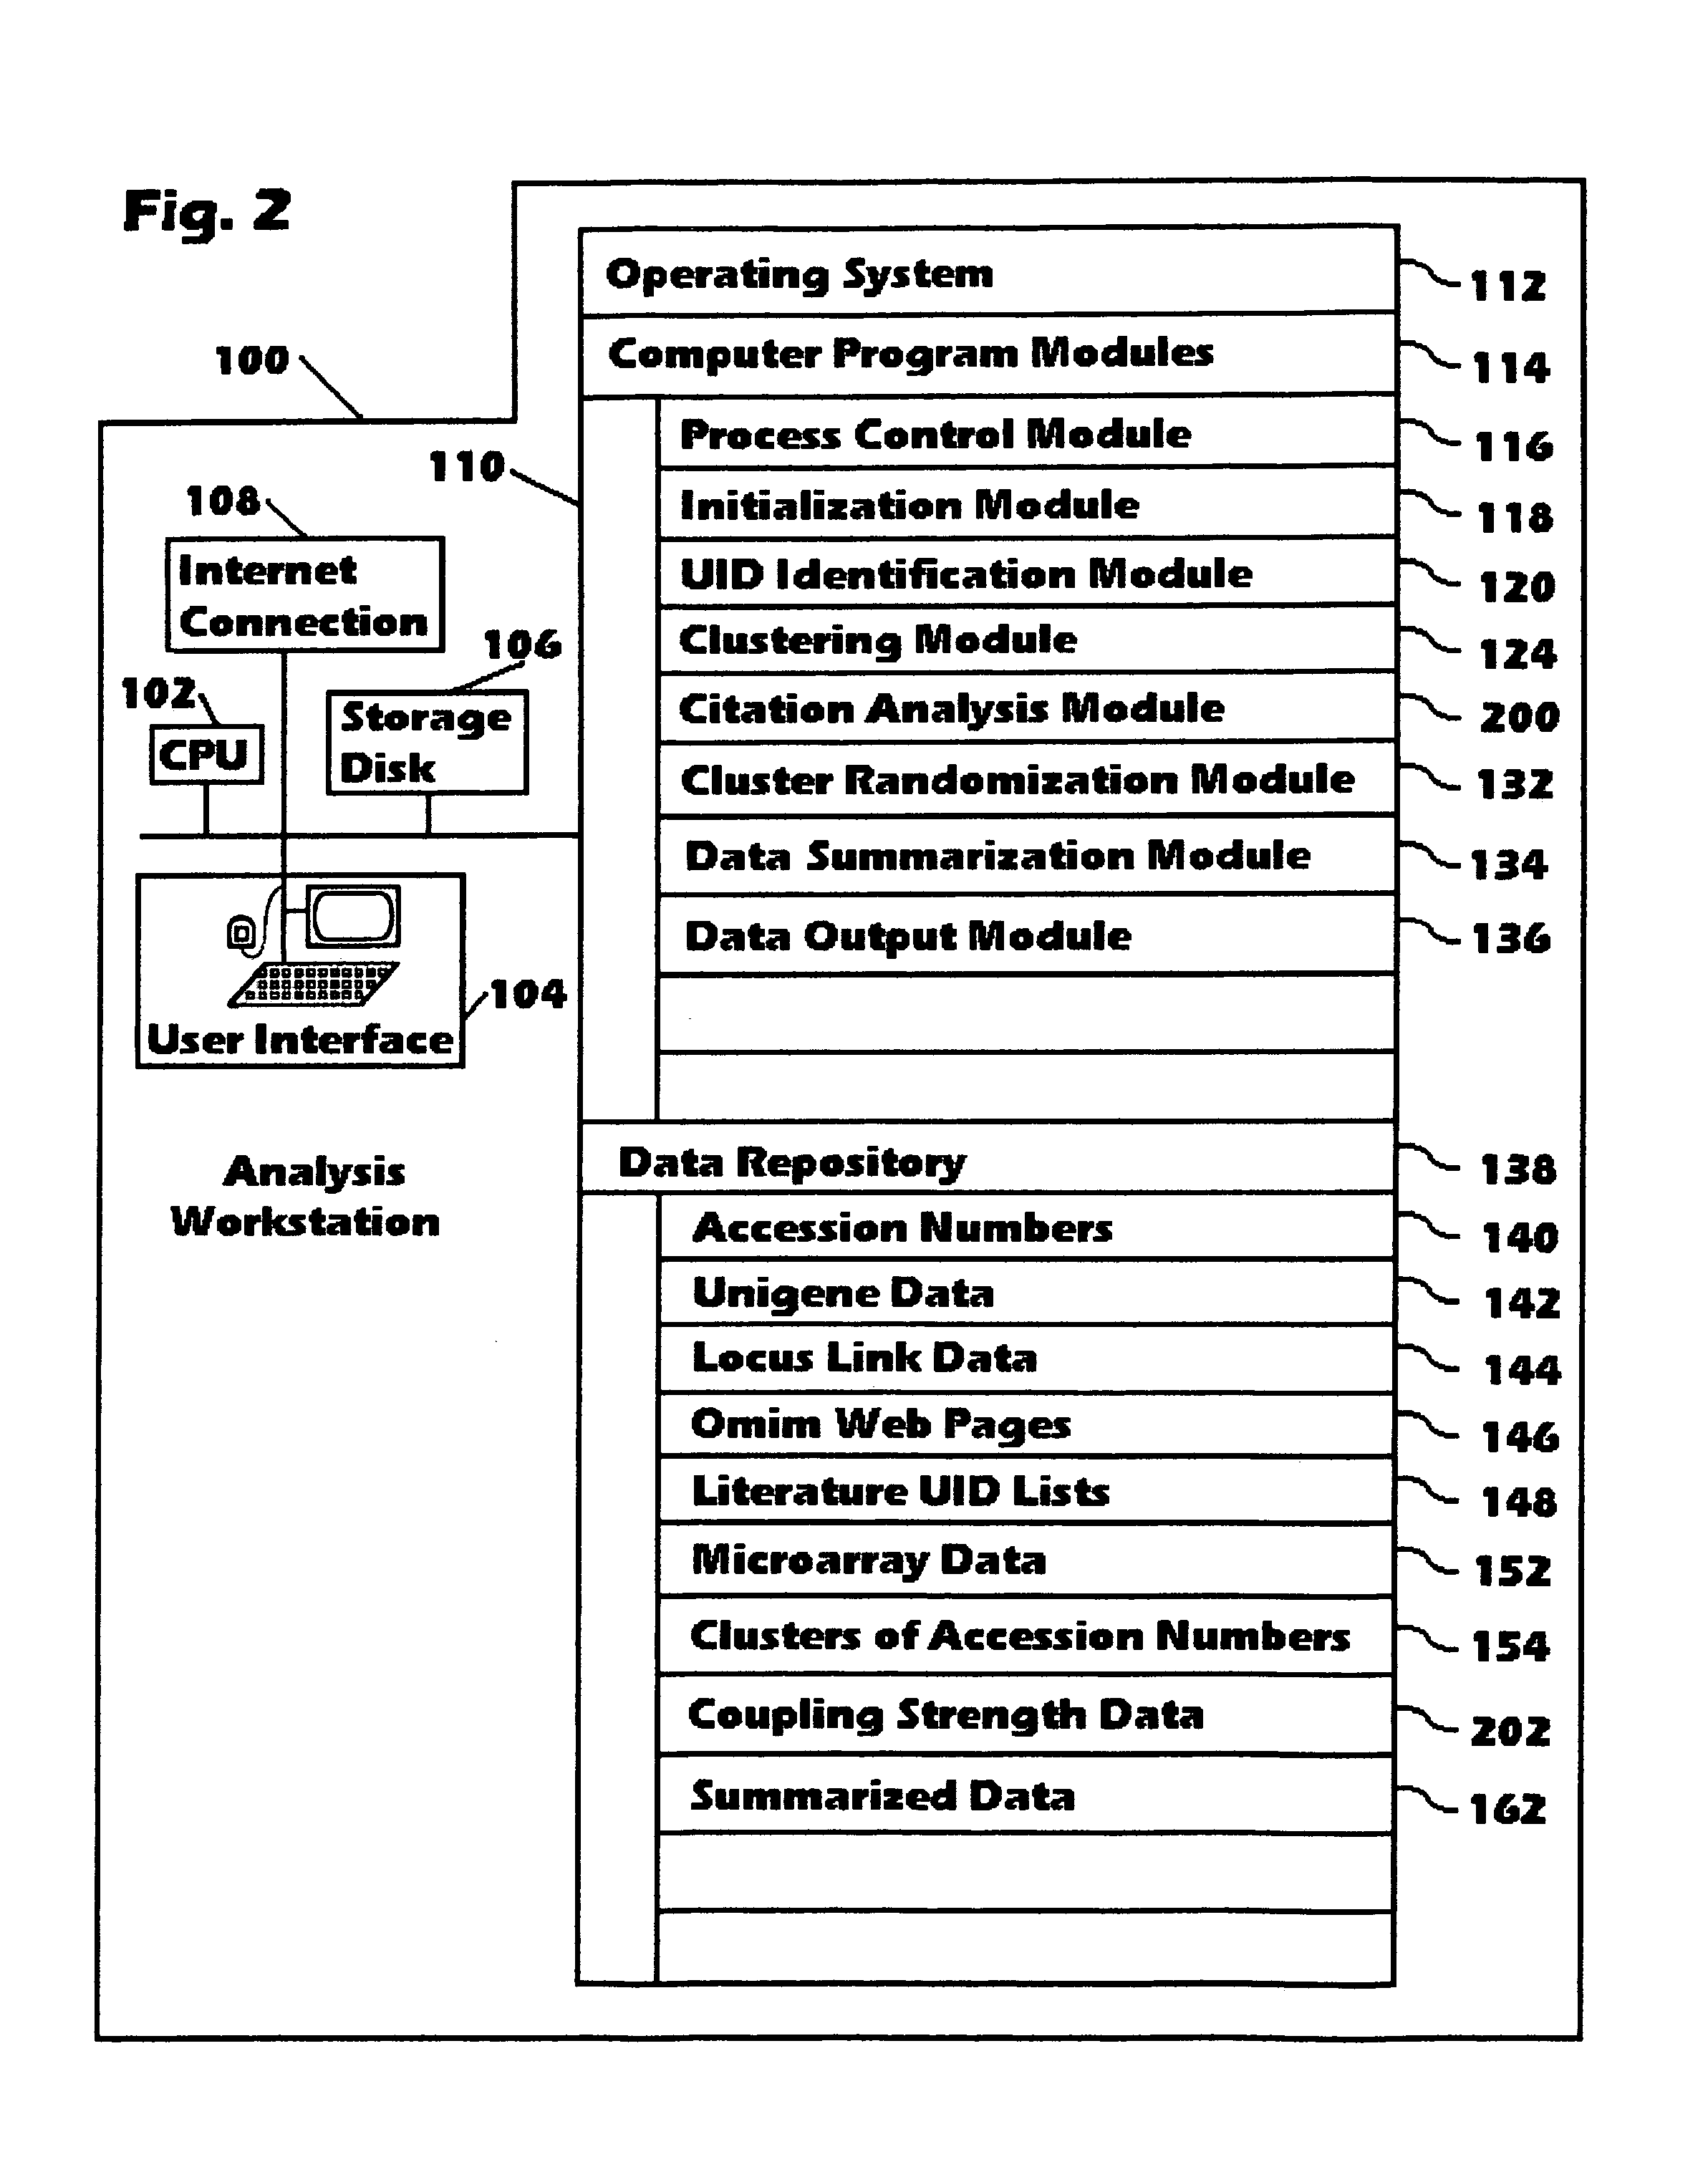 Systems, methods, and computer program product for analyzing microarray data